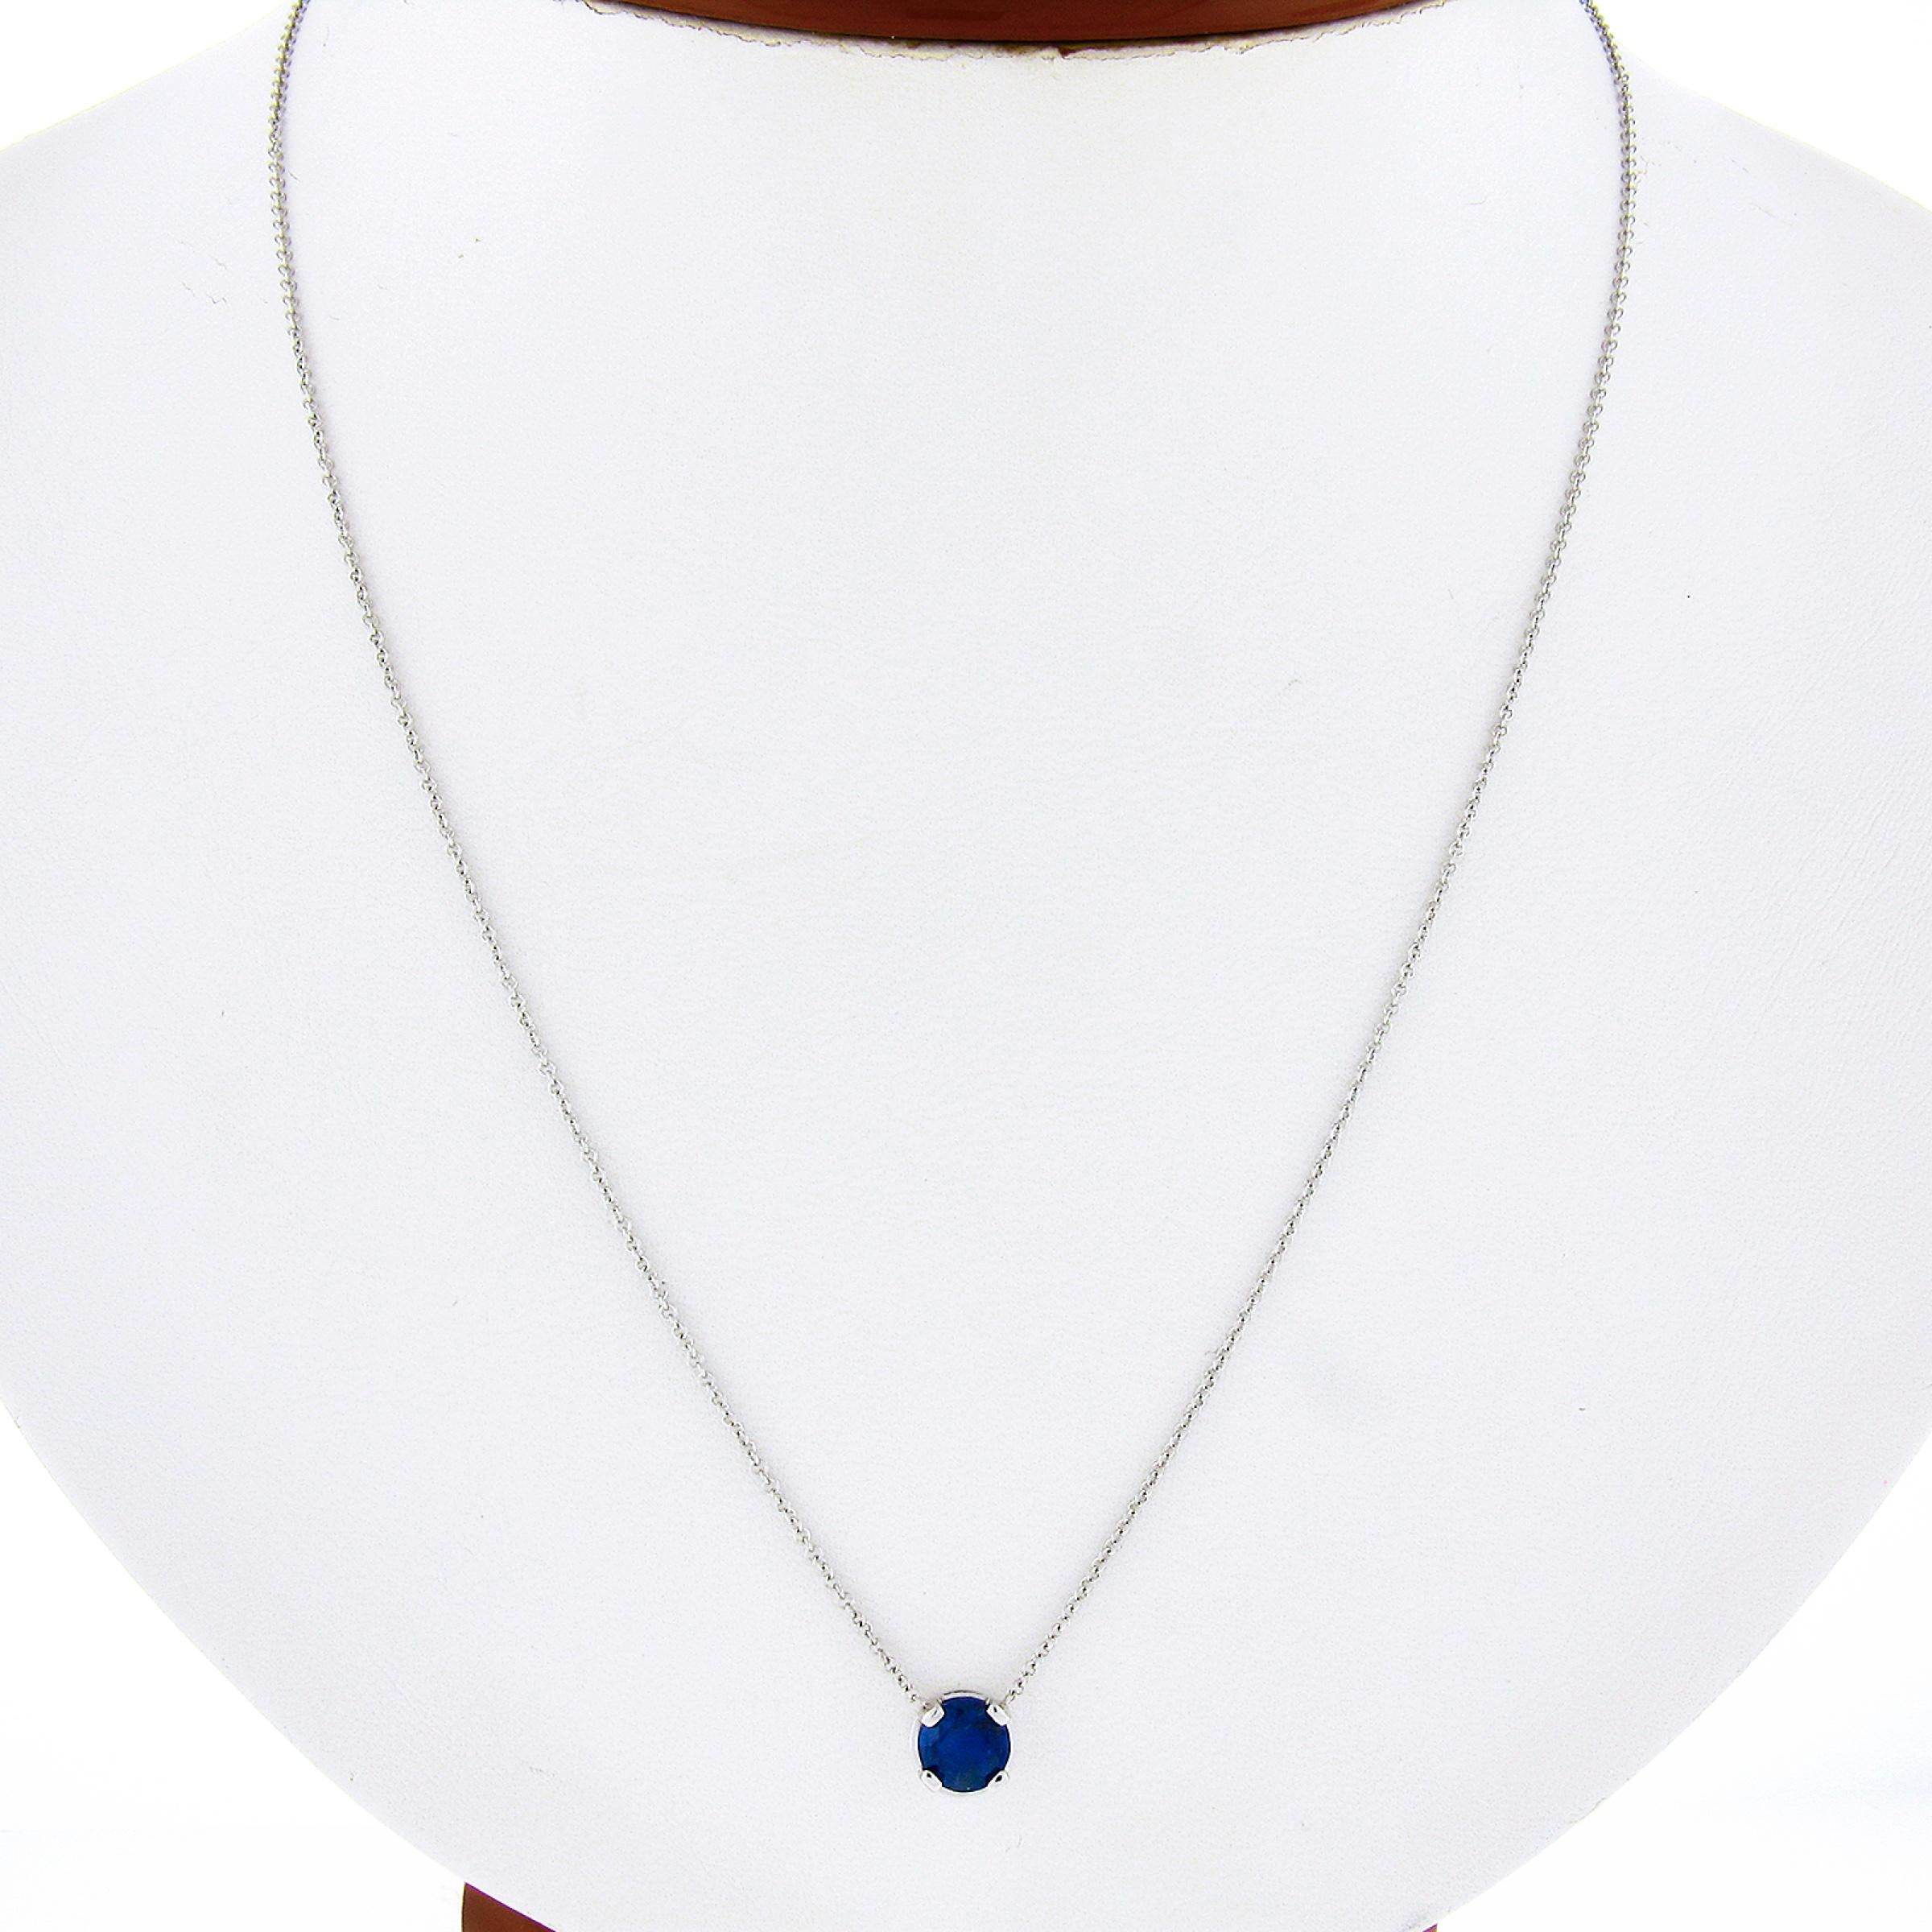 You are looking at a simple and classically styled sapphire solitaire pendant that is crafted in solid 14k white gold. The round cut sapphire in this pendant displays an absolutely gorgeous fine blue color showing remarkable amount of shine due to